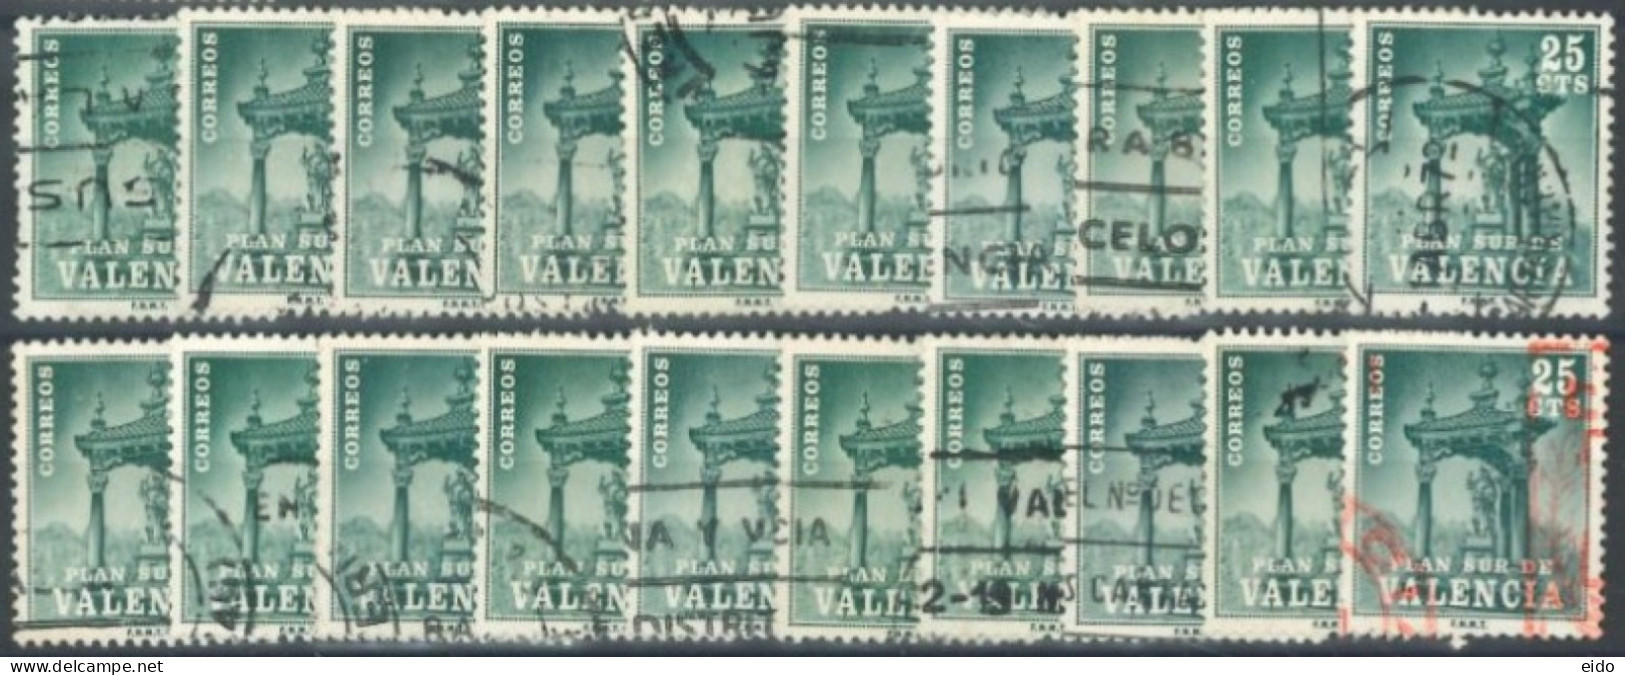 SPAIN, VALENCIA STAMP QTY. 20 DISCOUNTED (SPECIAL PRICE), USED. - Usati